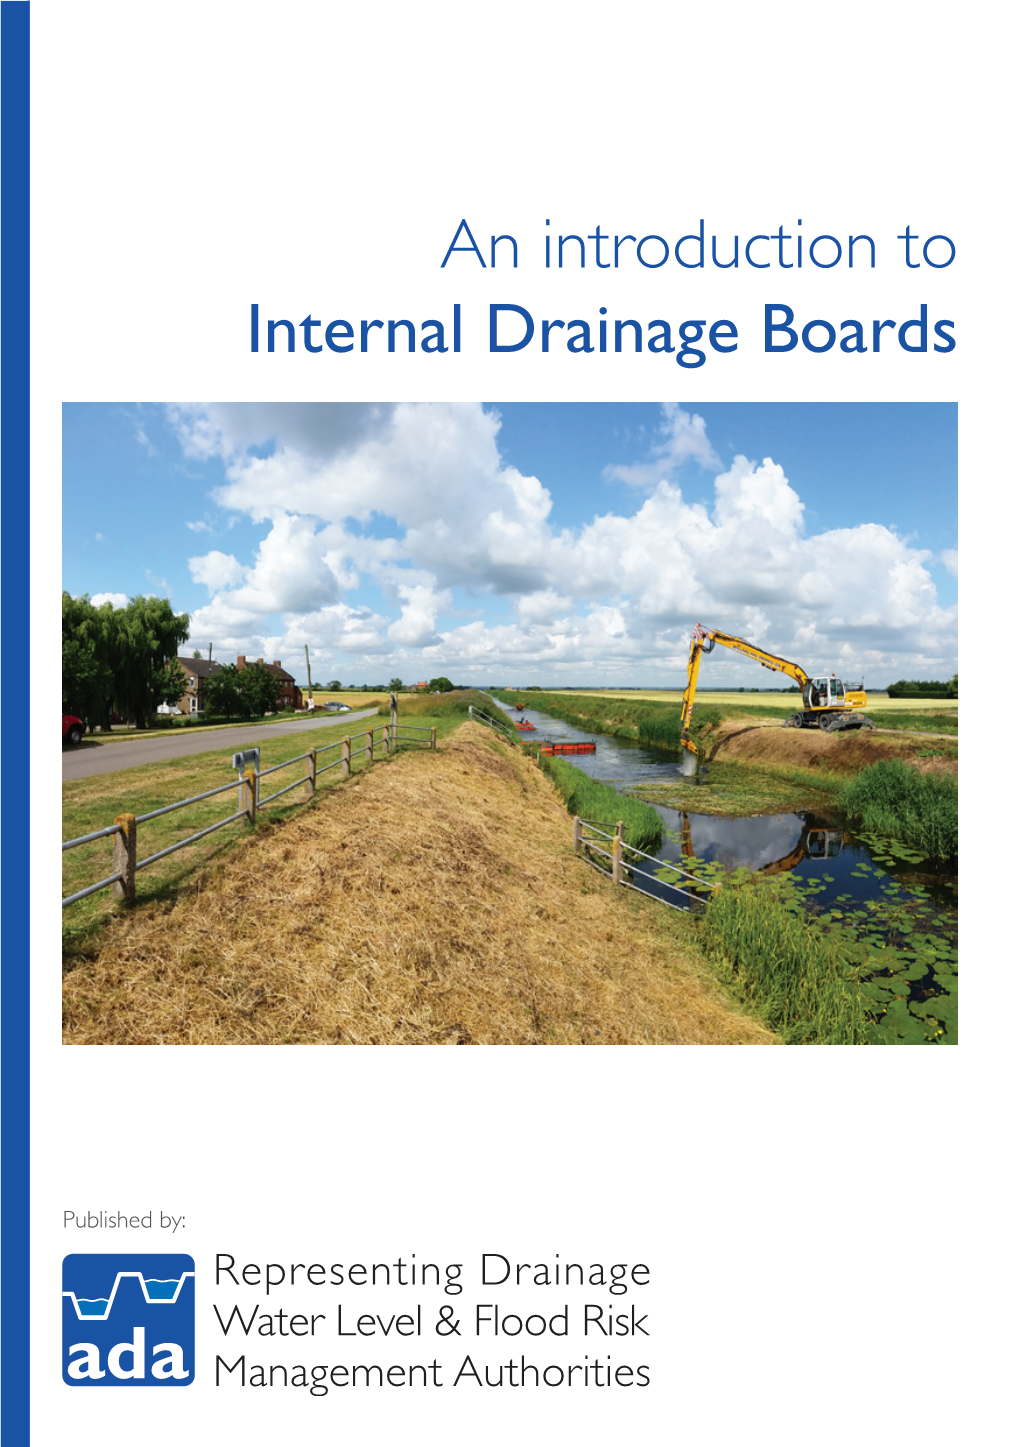 An Introduction to Internal Drainage Boards